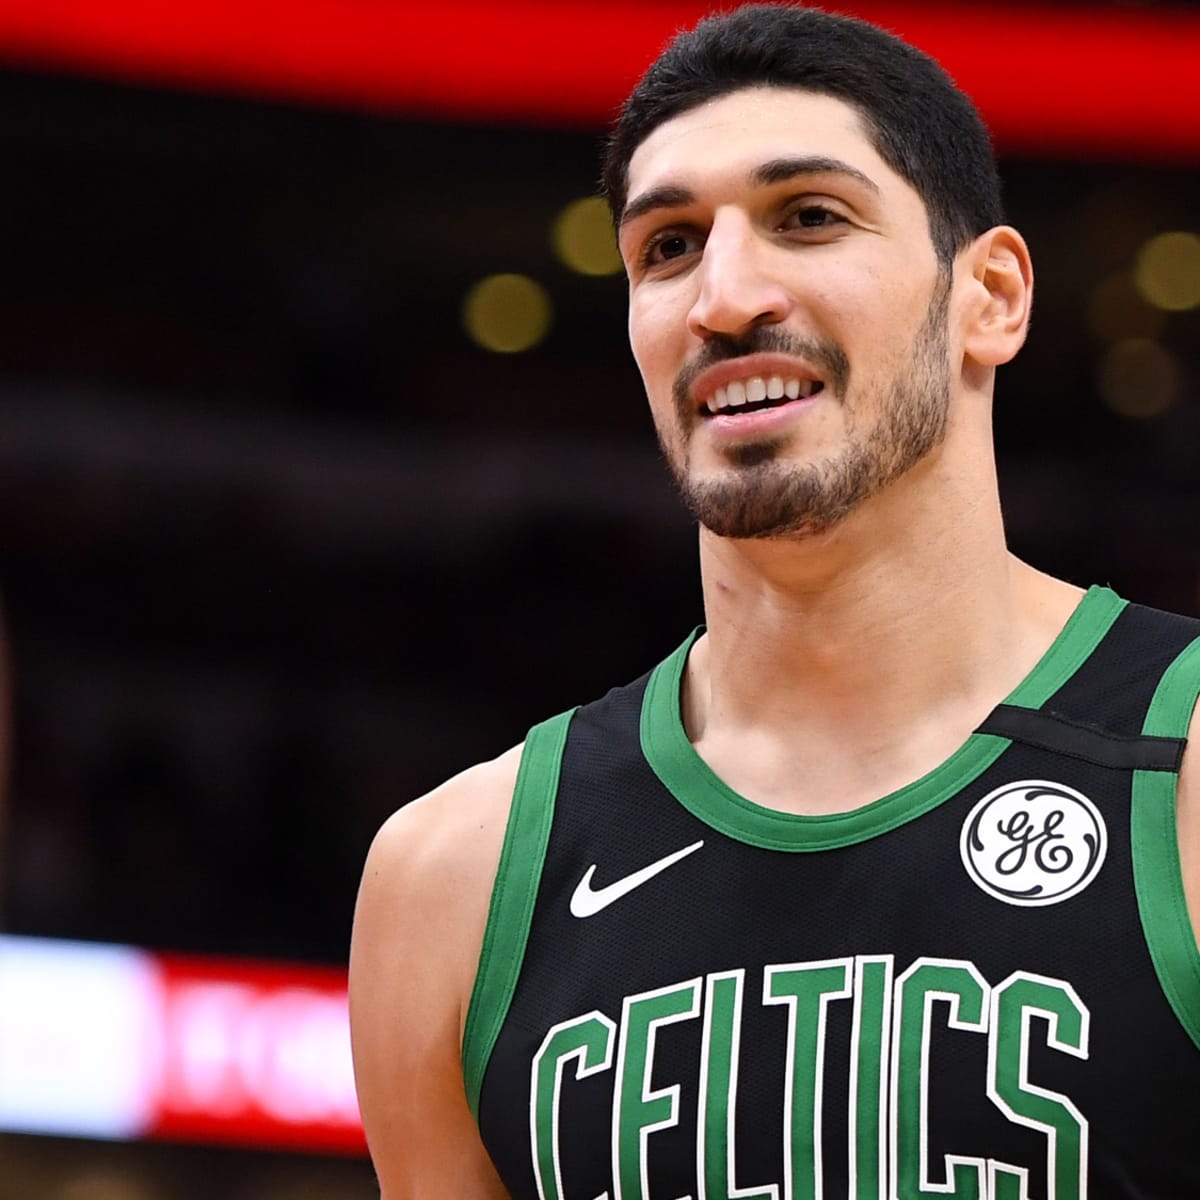 Father of Turkish NBA player Kanter acquitted of terrorism links